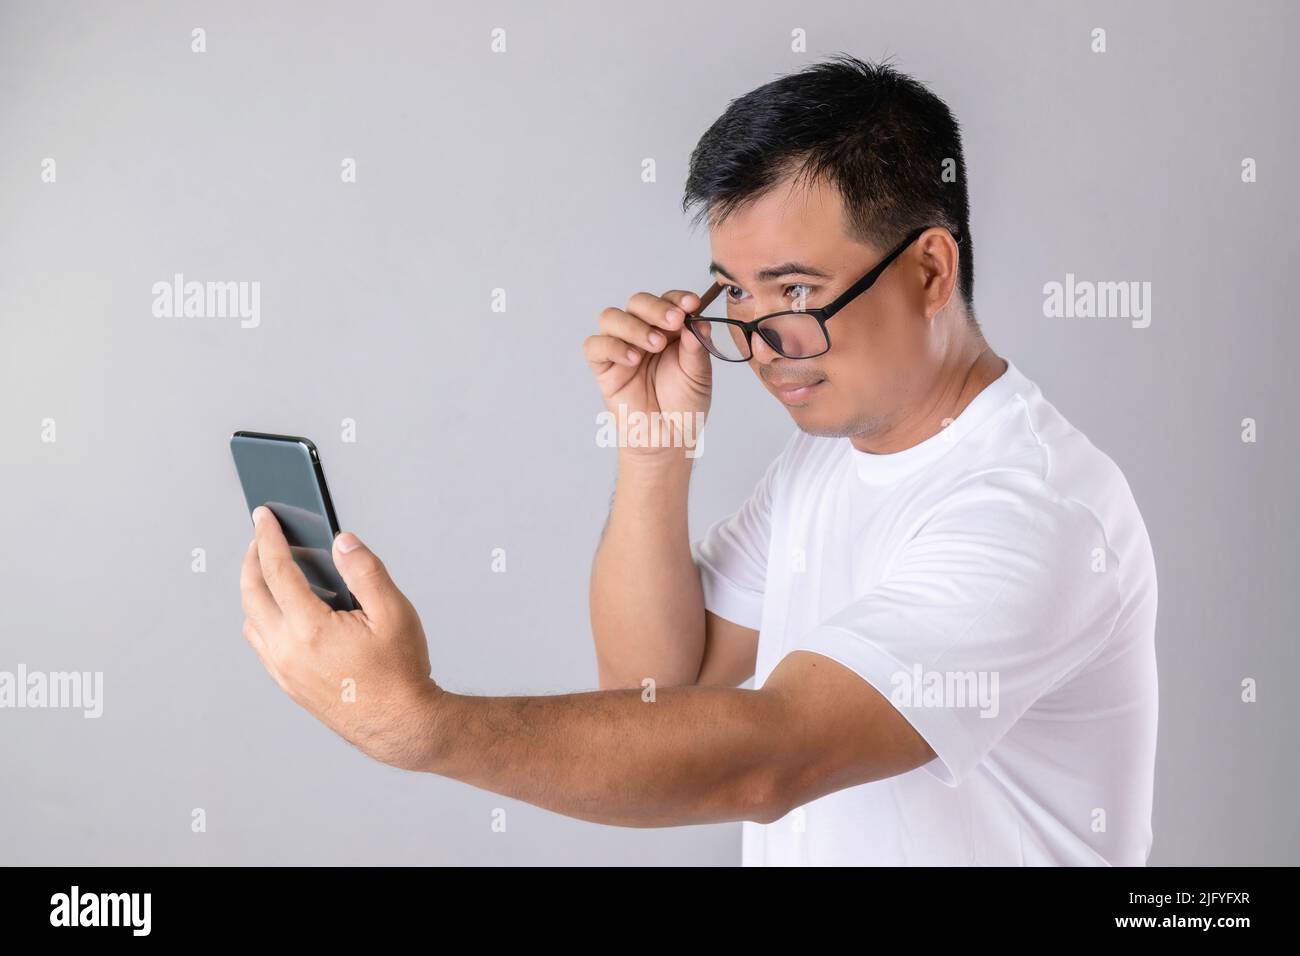 Short or long sighted concept : Man weraing eyeglasses and trying to look clearly on smarthphone in studio shot on grey background Stock Photo